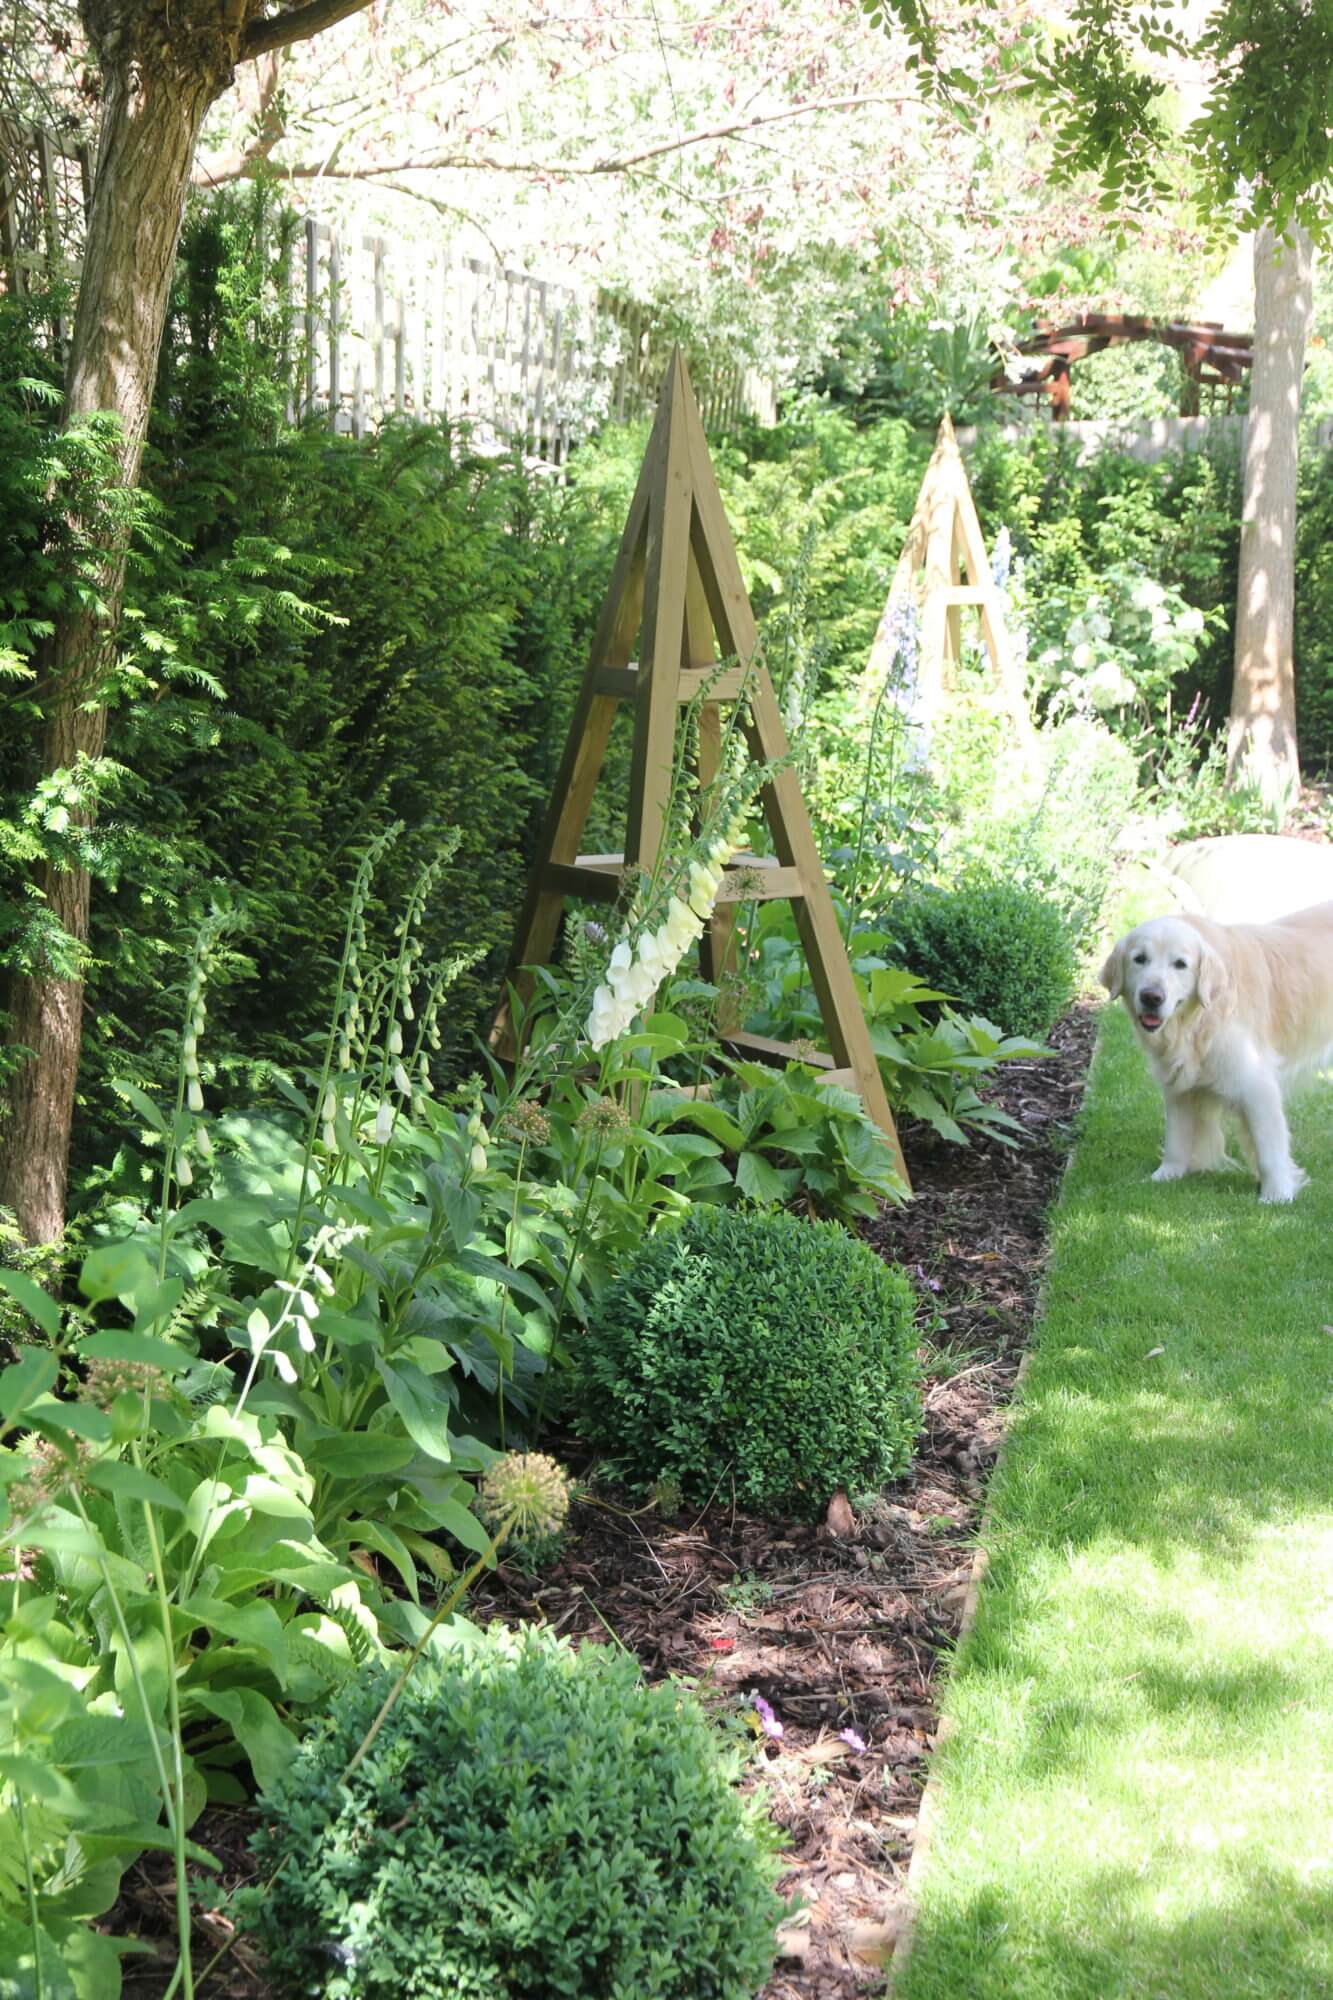 Golden retriever sniffing around flower bed with wooden tripods